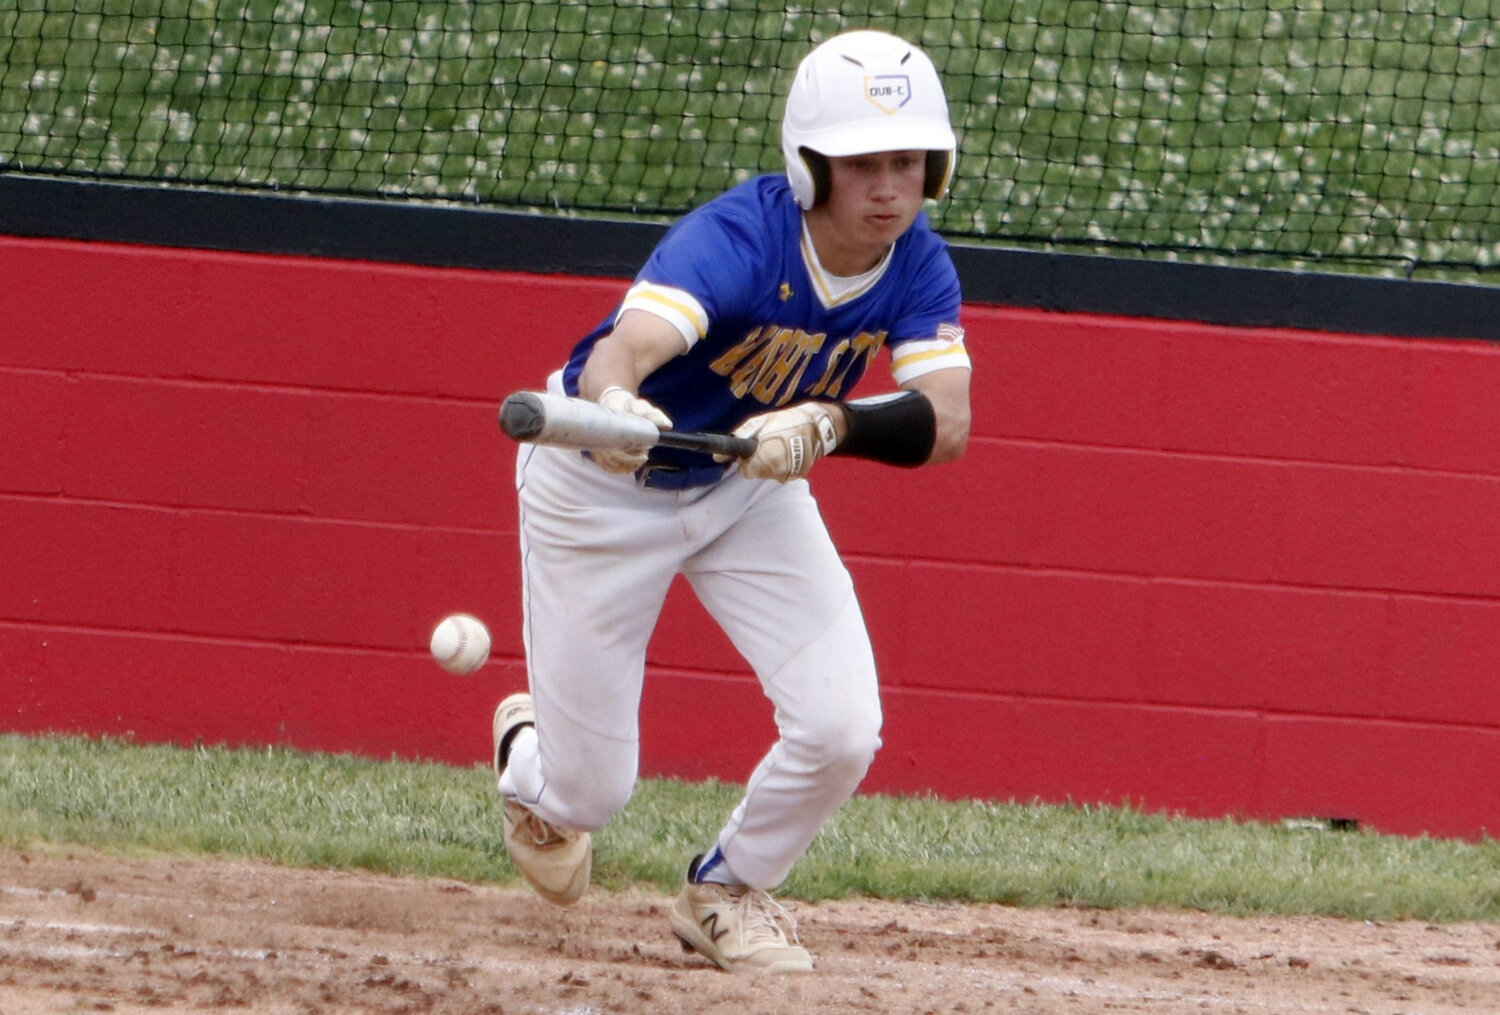 Zach Rodriguez lays down a bunt during Wright City's district semifinal loss to St. Charles West.